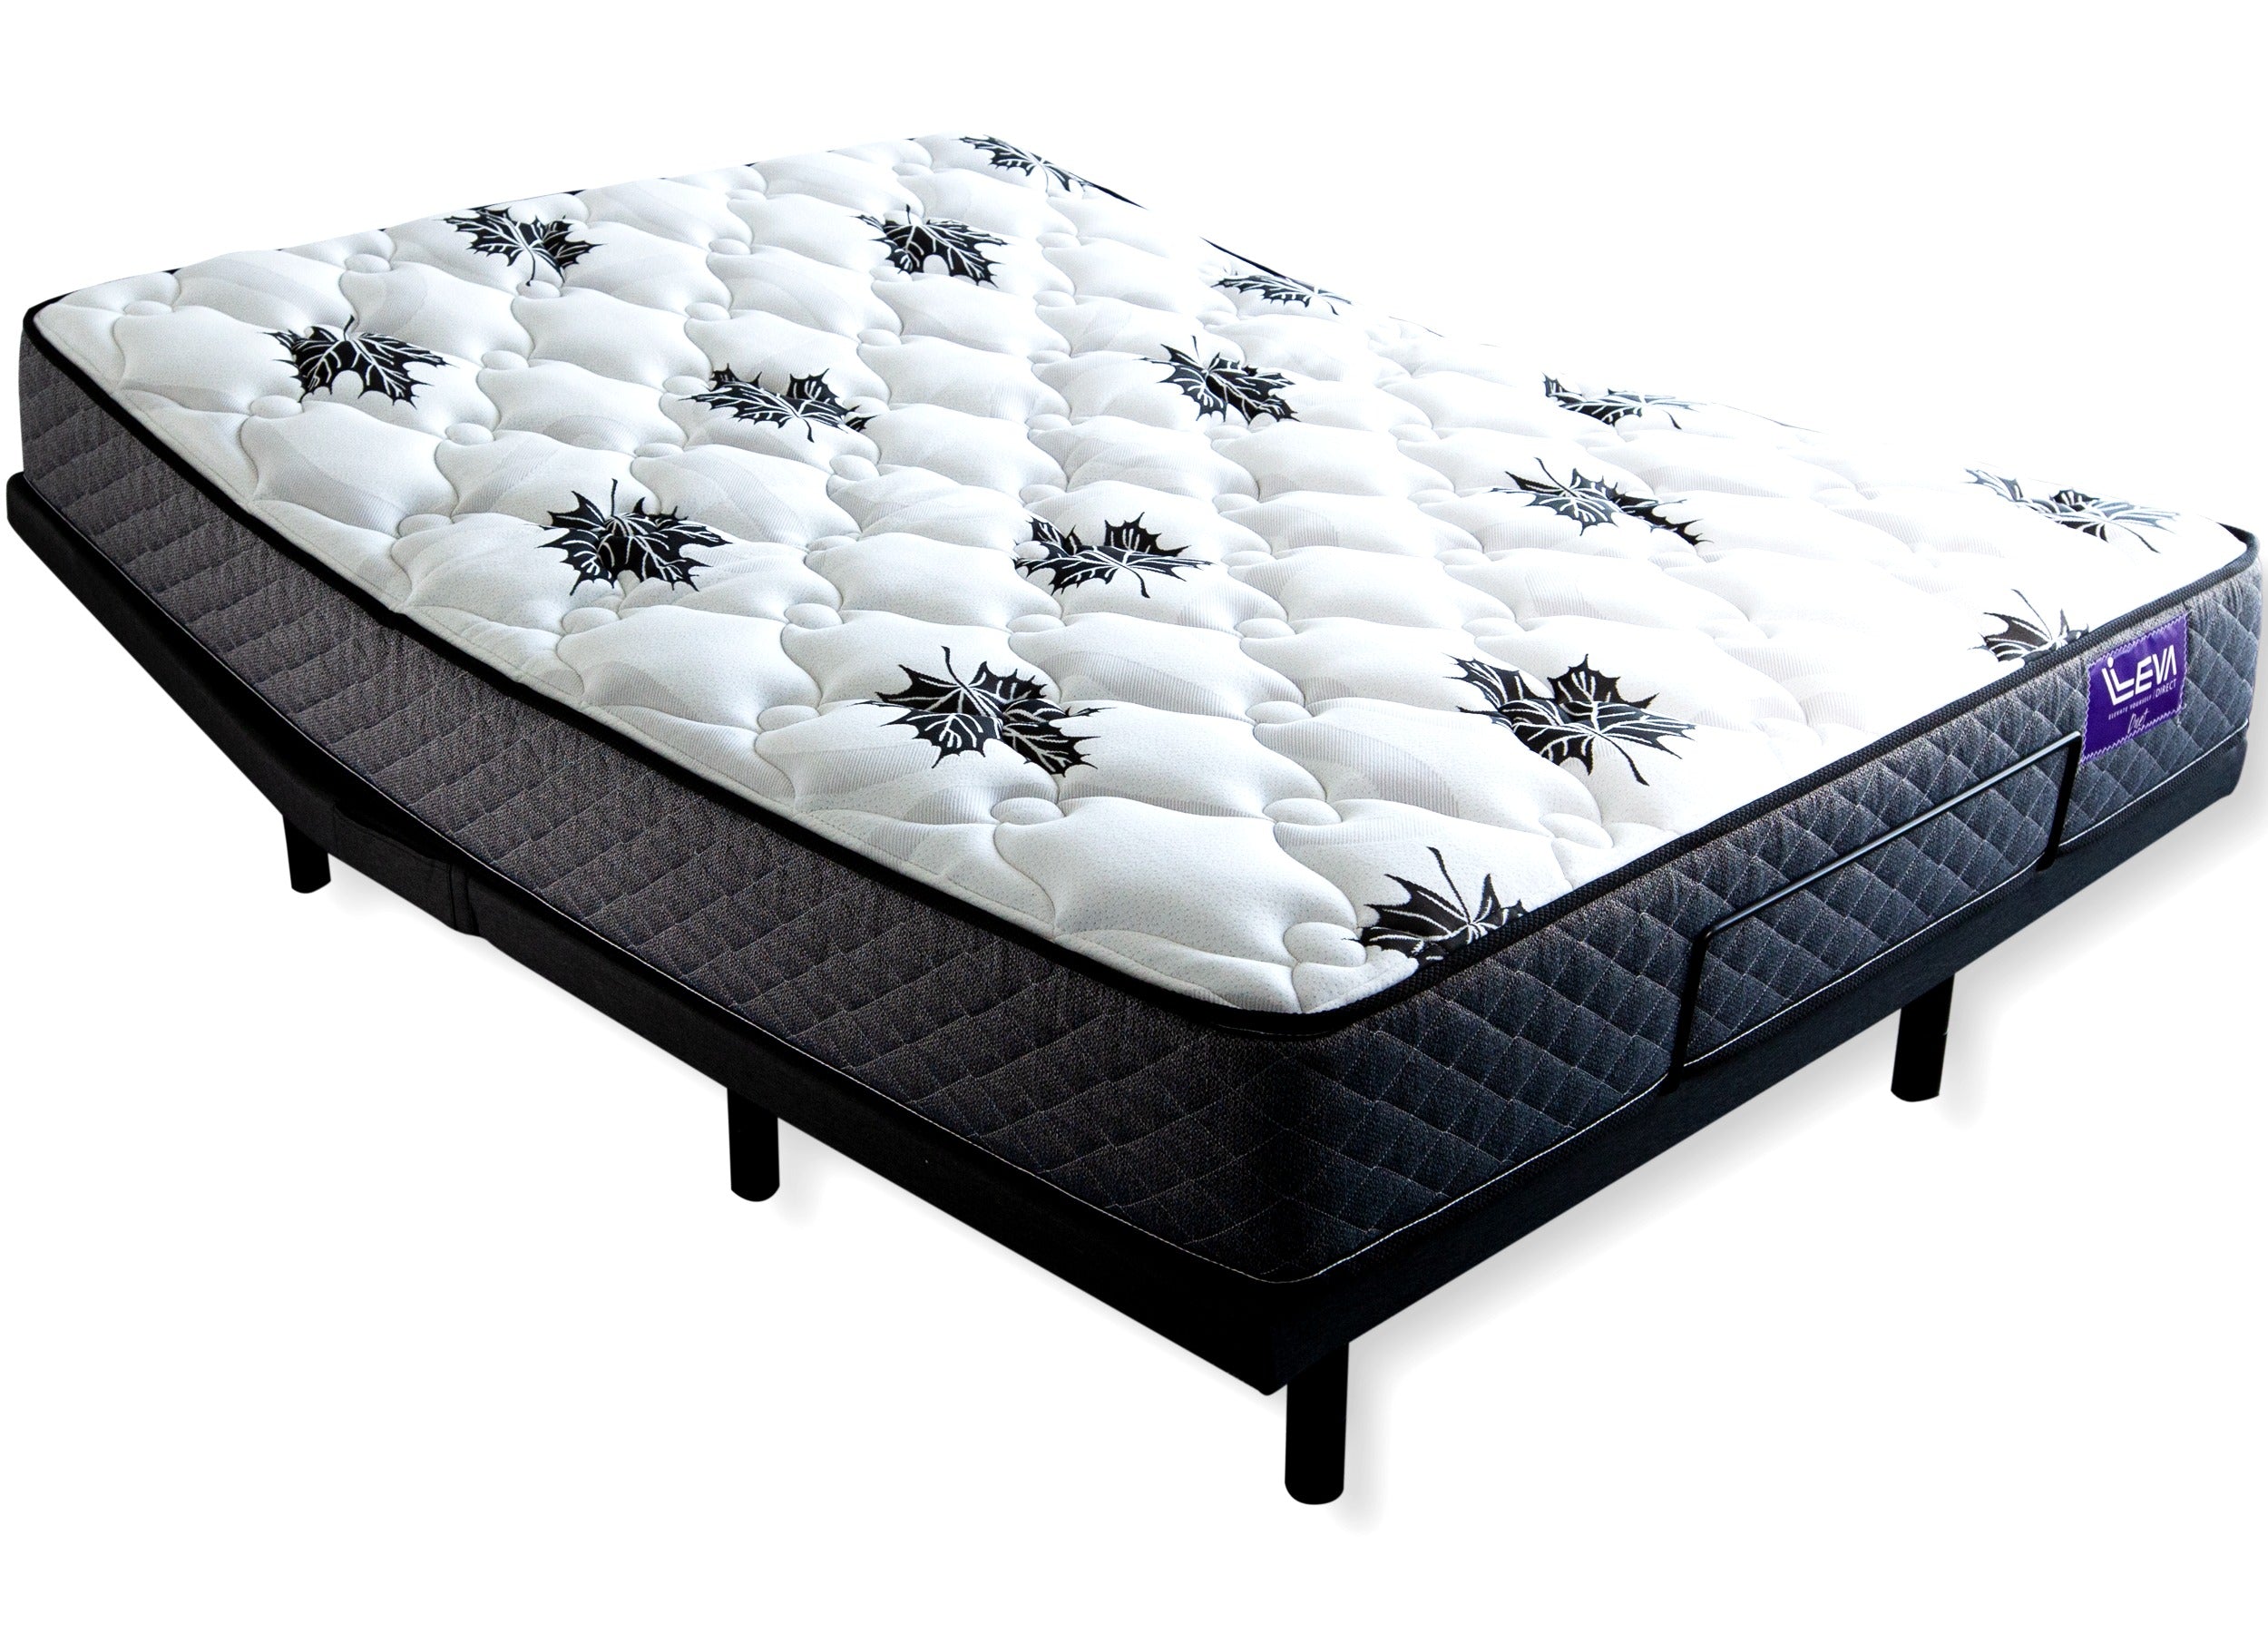 Rembrandt Full/Double Adjustable Bed